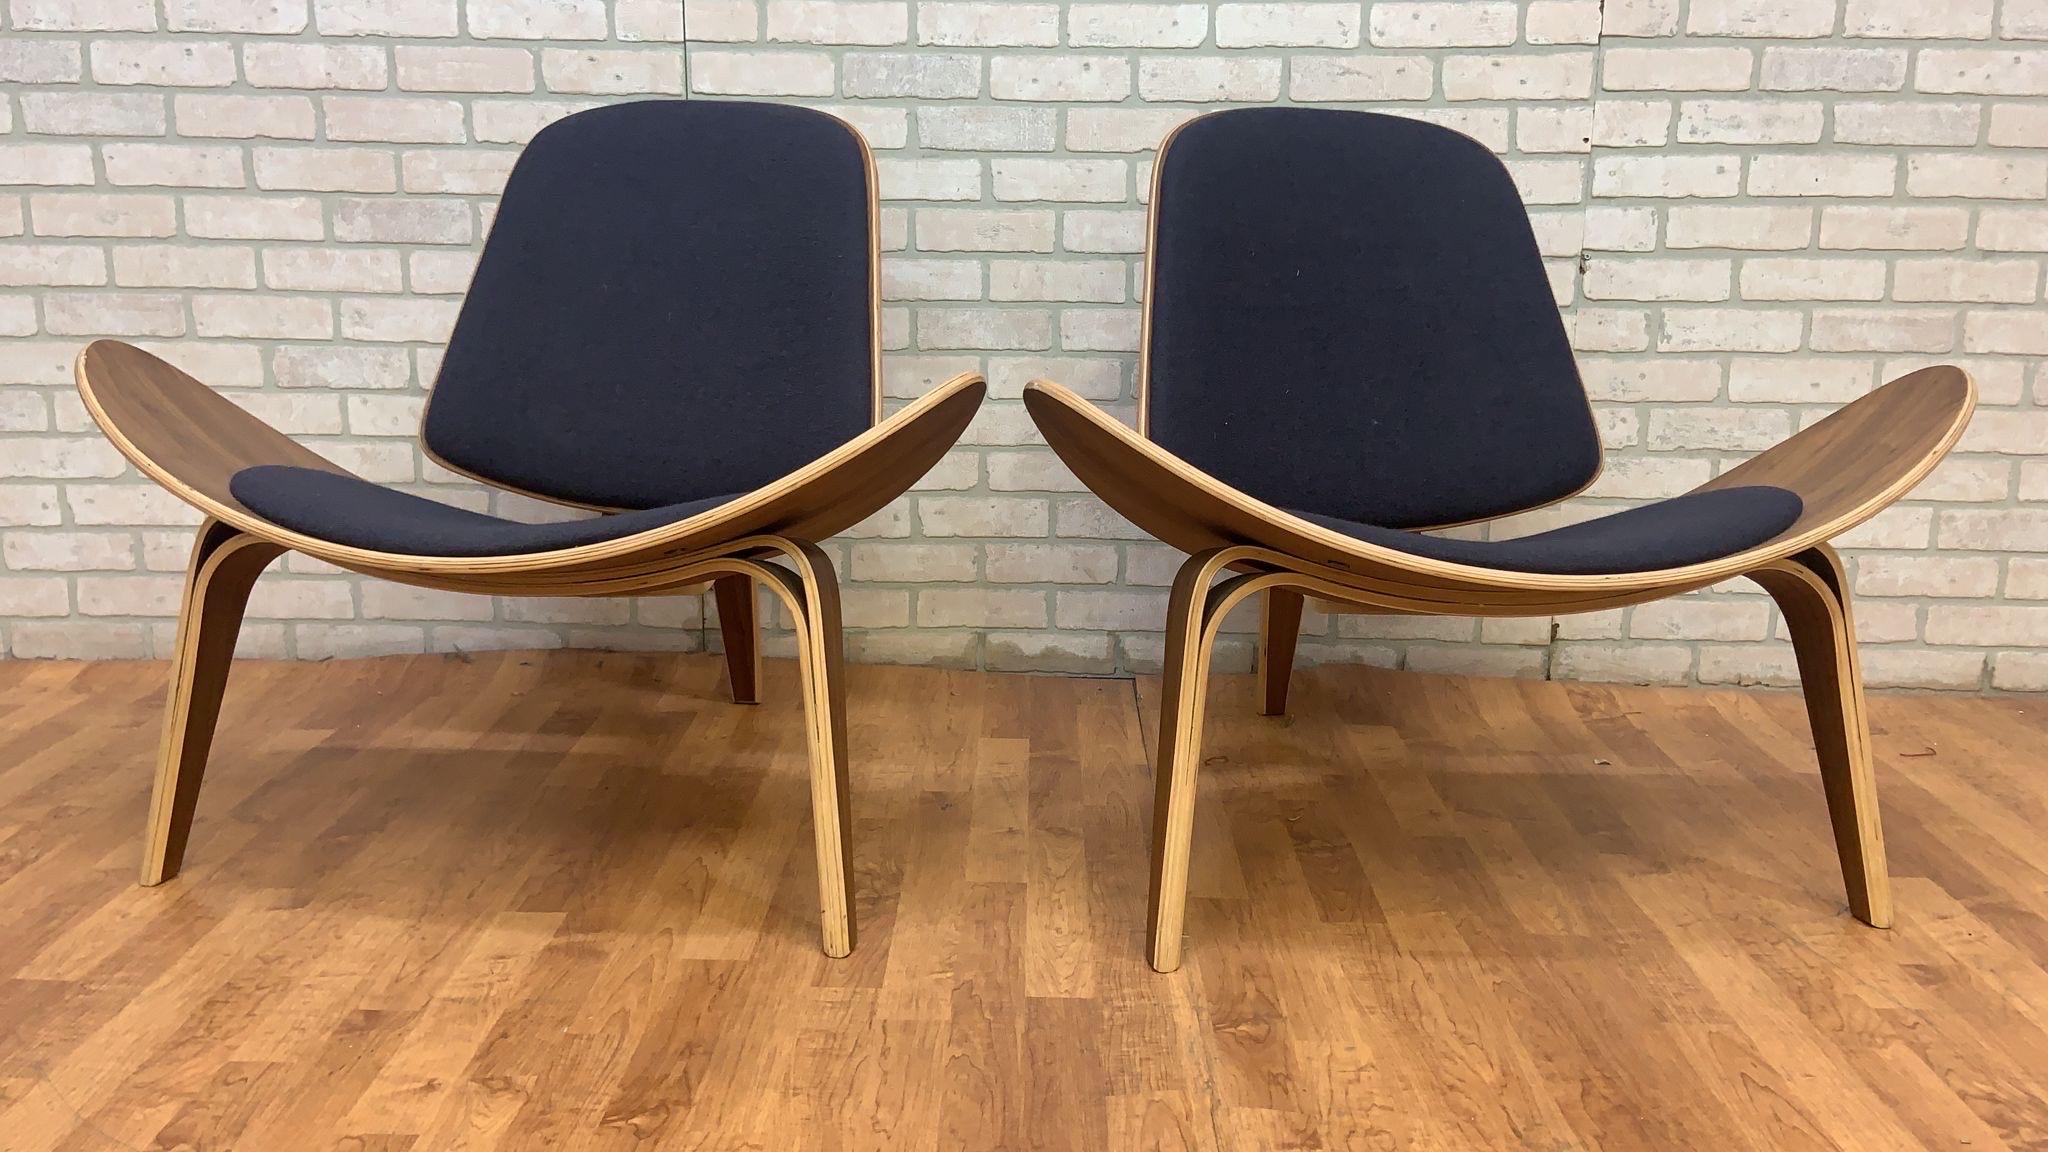 Mid-20th Century Mid-Century Modern Hans Wegner Style Bent Plywood 3 Leg Shell Chairs, Pair For Sale